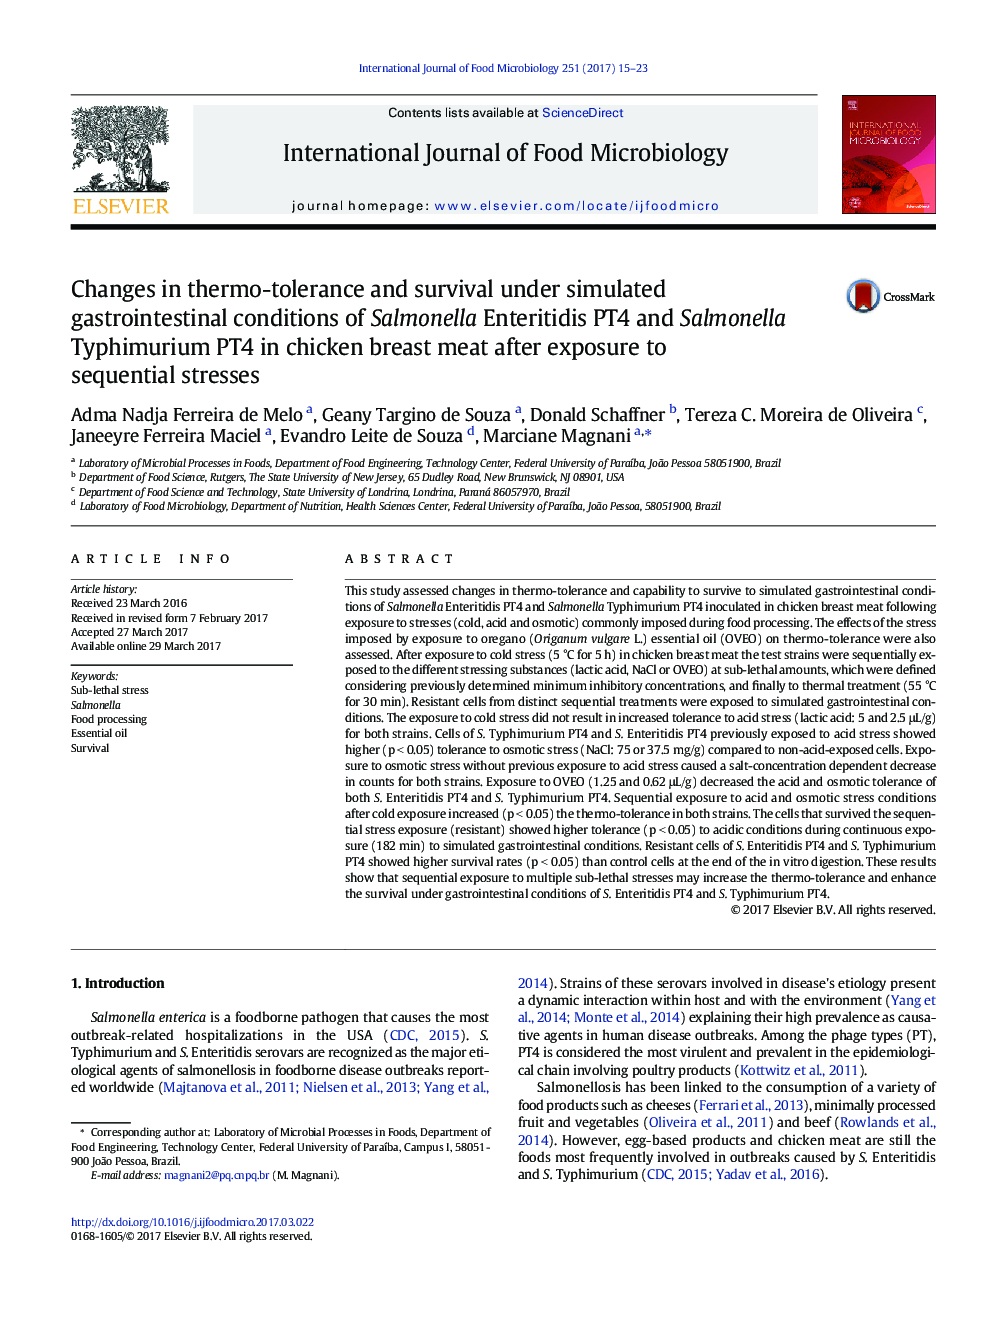 Changes in thermo-tolerance and survival under simulated gastrointestinal conditions of Salmonella Enteritidis PT4 and Salmonella Typhimurium PT4 in chicken breast meat after exposure to sequential stresses